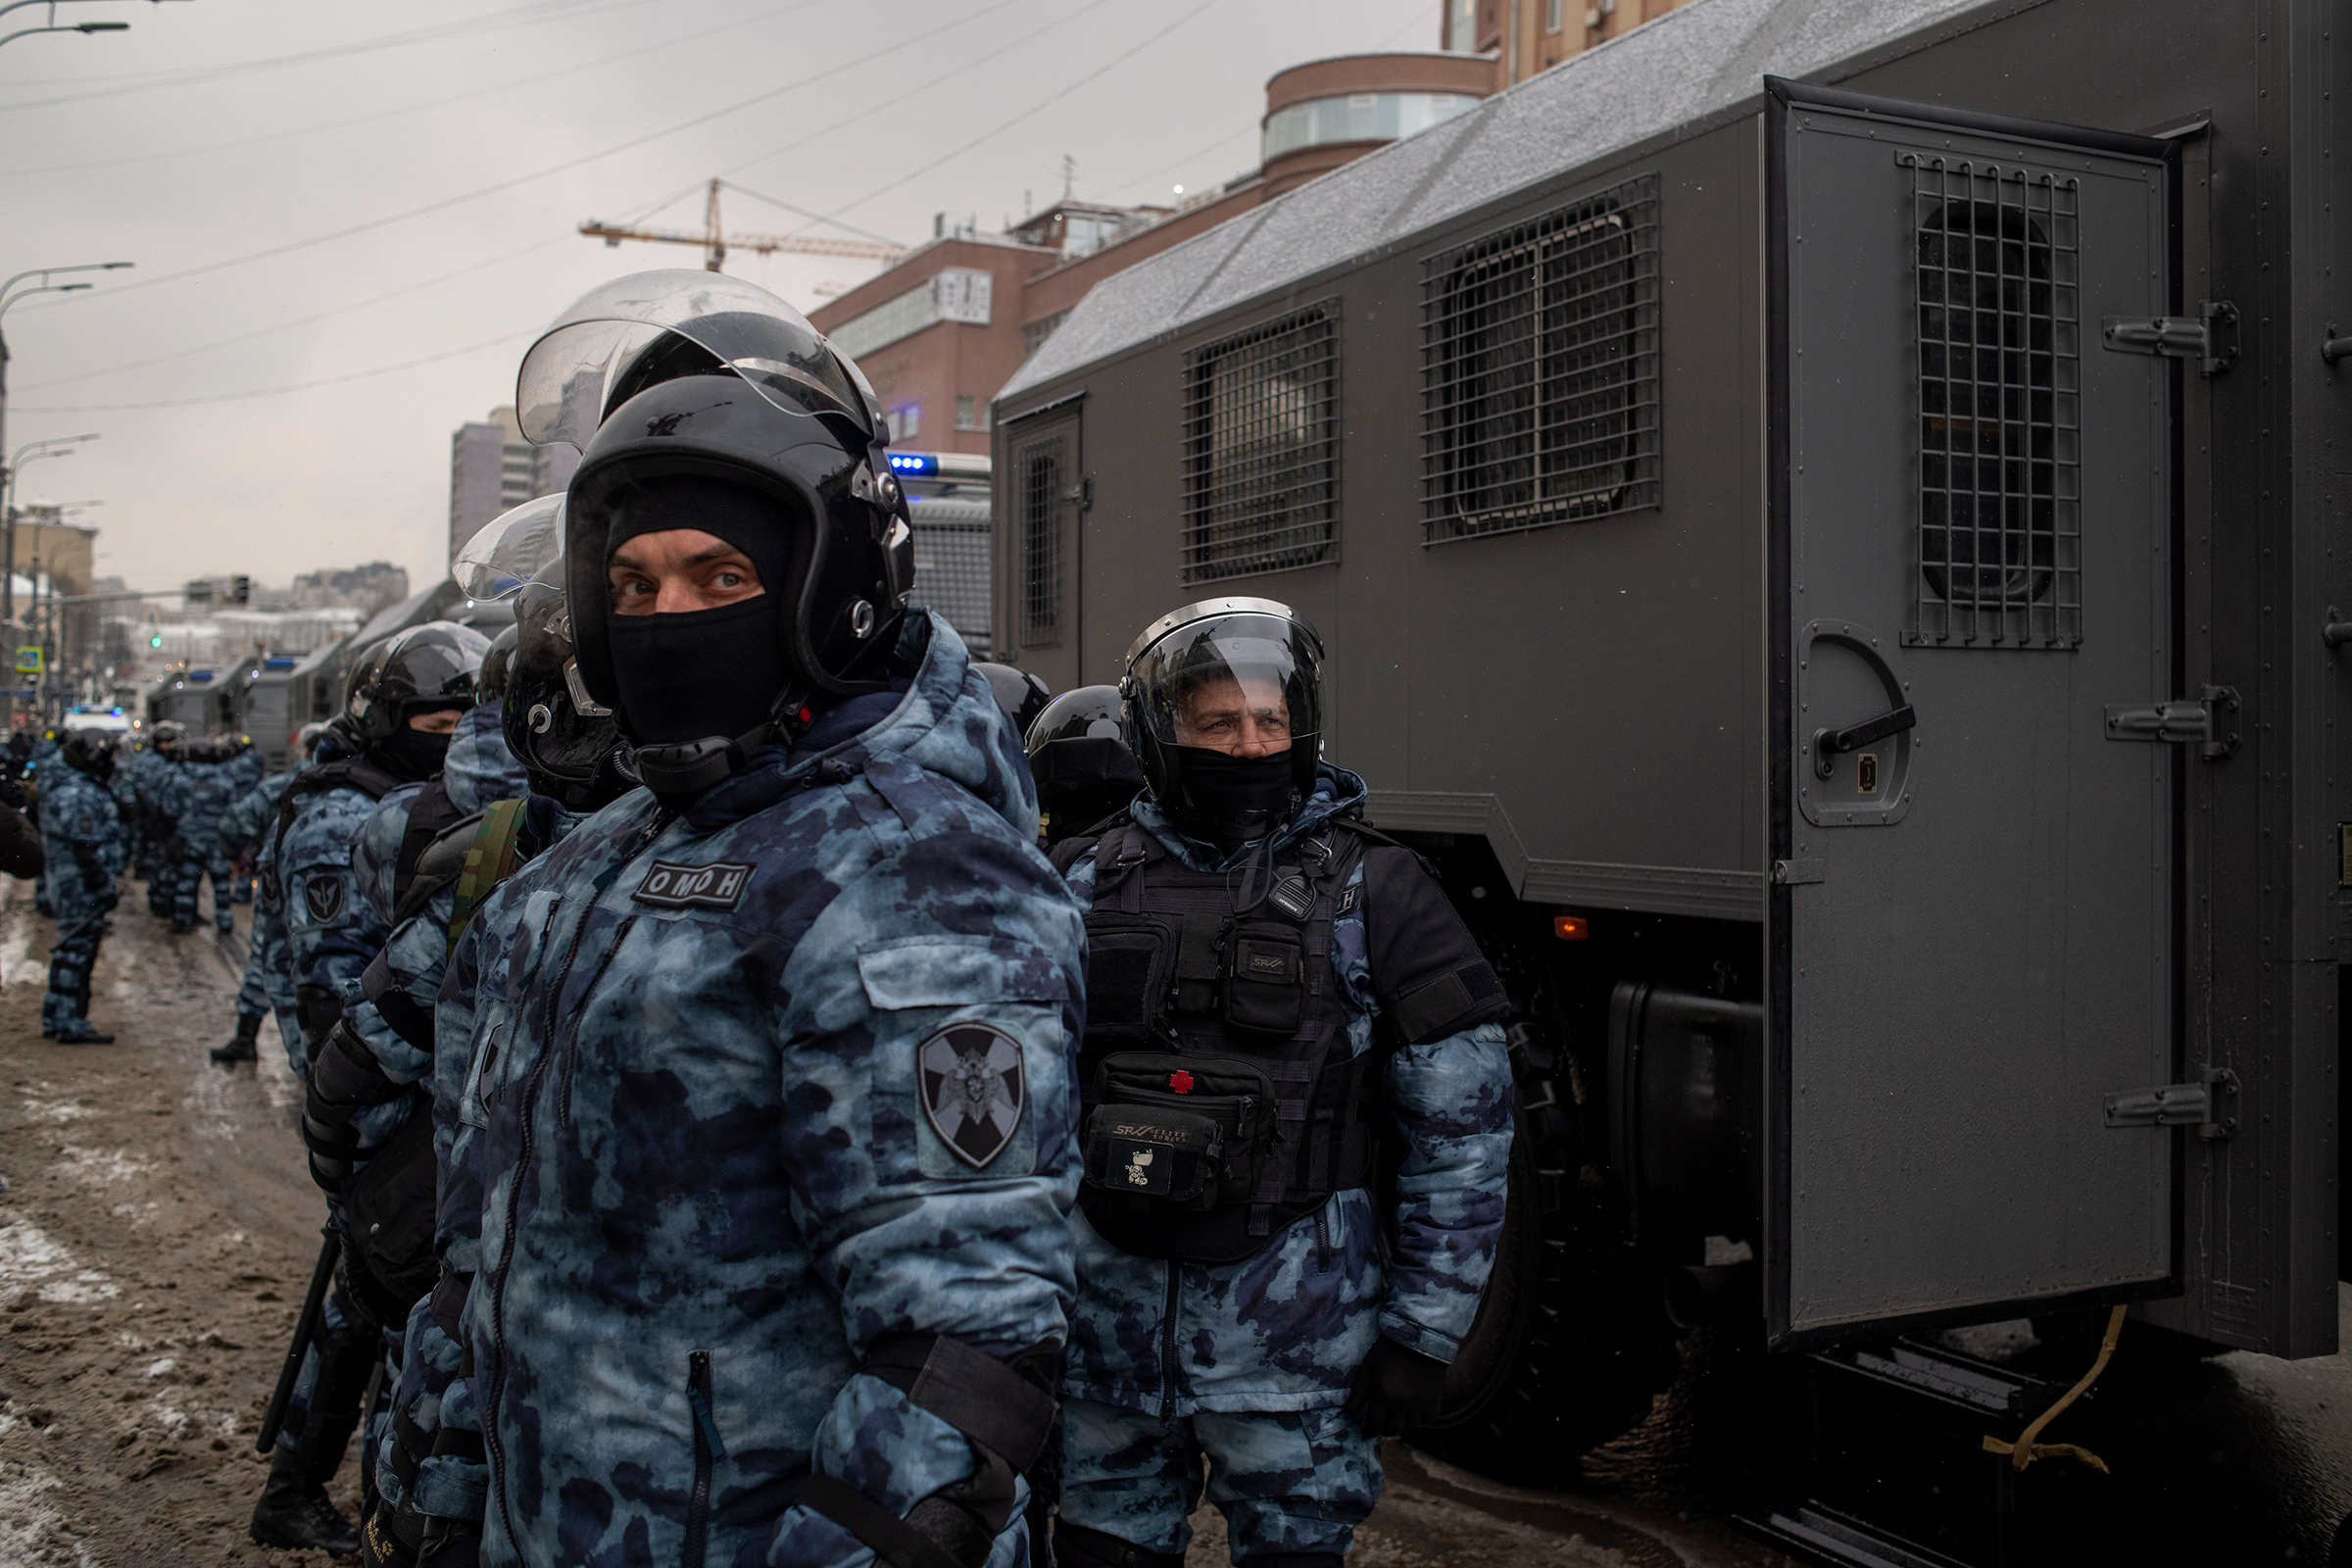 Protests swelled across Russia on Jan. 31, marking a second consecutive weekend in the wake of Alexei Navalny's arrest. (Yuri Kozyrev—NOOR for TIME)